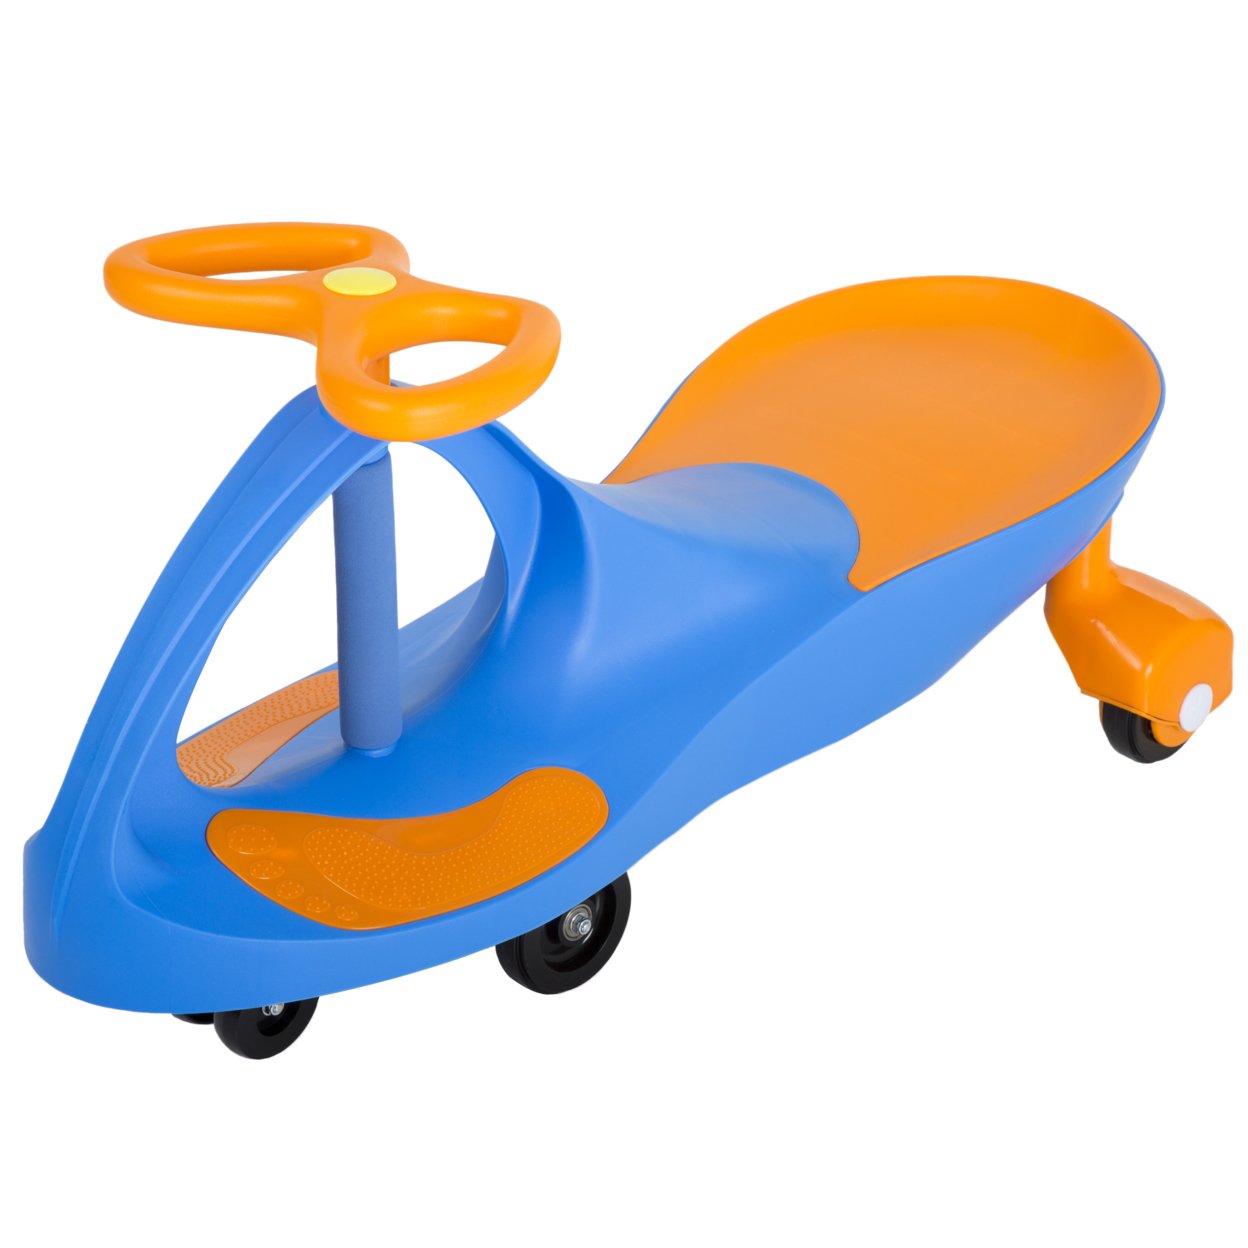 Lil' Rider Blue And Orange Wiggle Ride-on Car Roller Coaster Car Energy Powered Ride On Toy